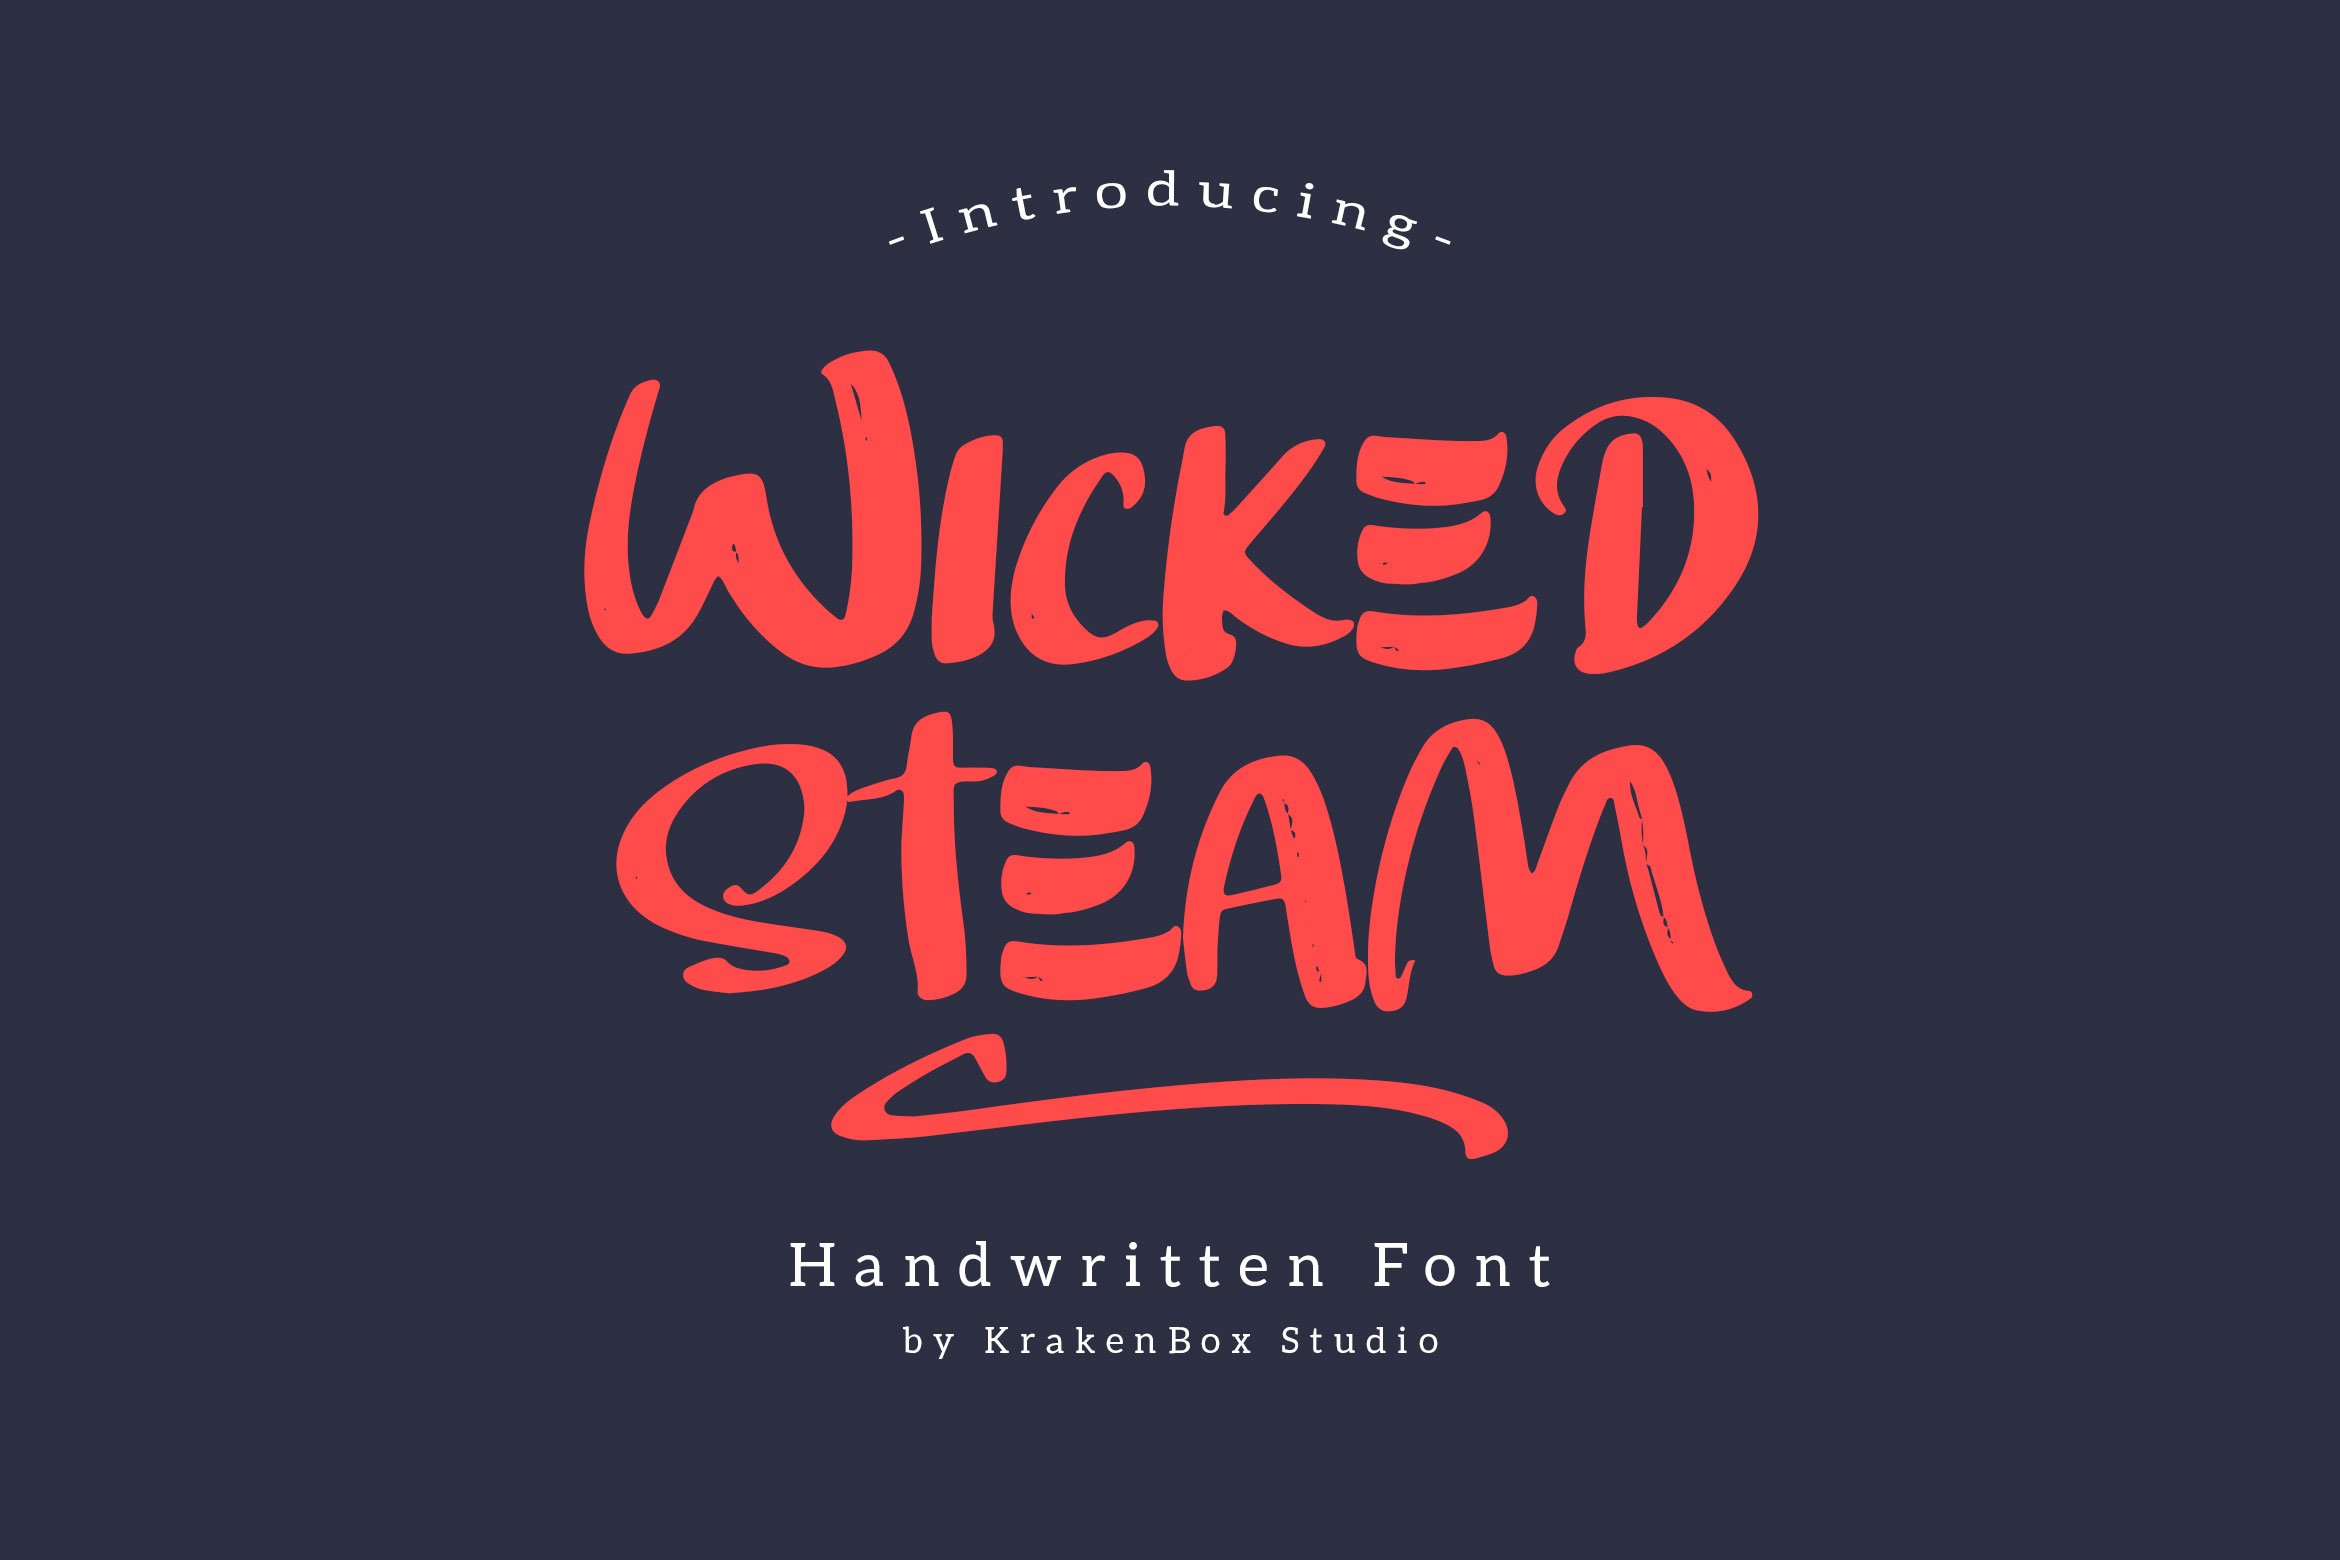 Wicked Steam - Handwritten Font cover image.